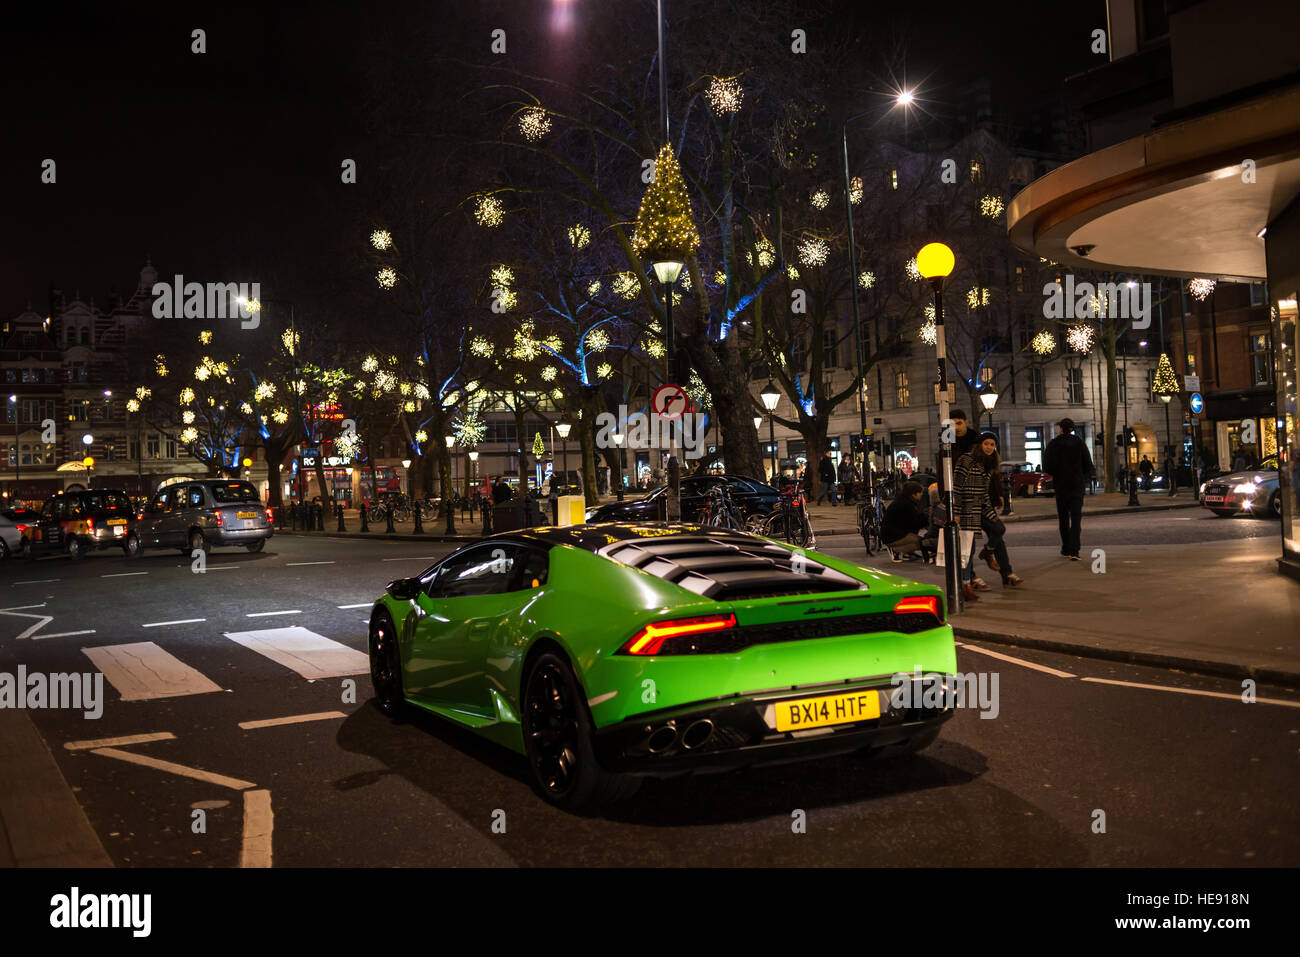 Night view of Sloane Square with Christmas light decorations and big green super car Lamborghini passing by. Chelsea, London, UK Stock Photo